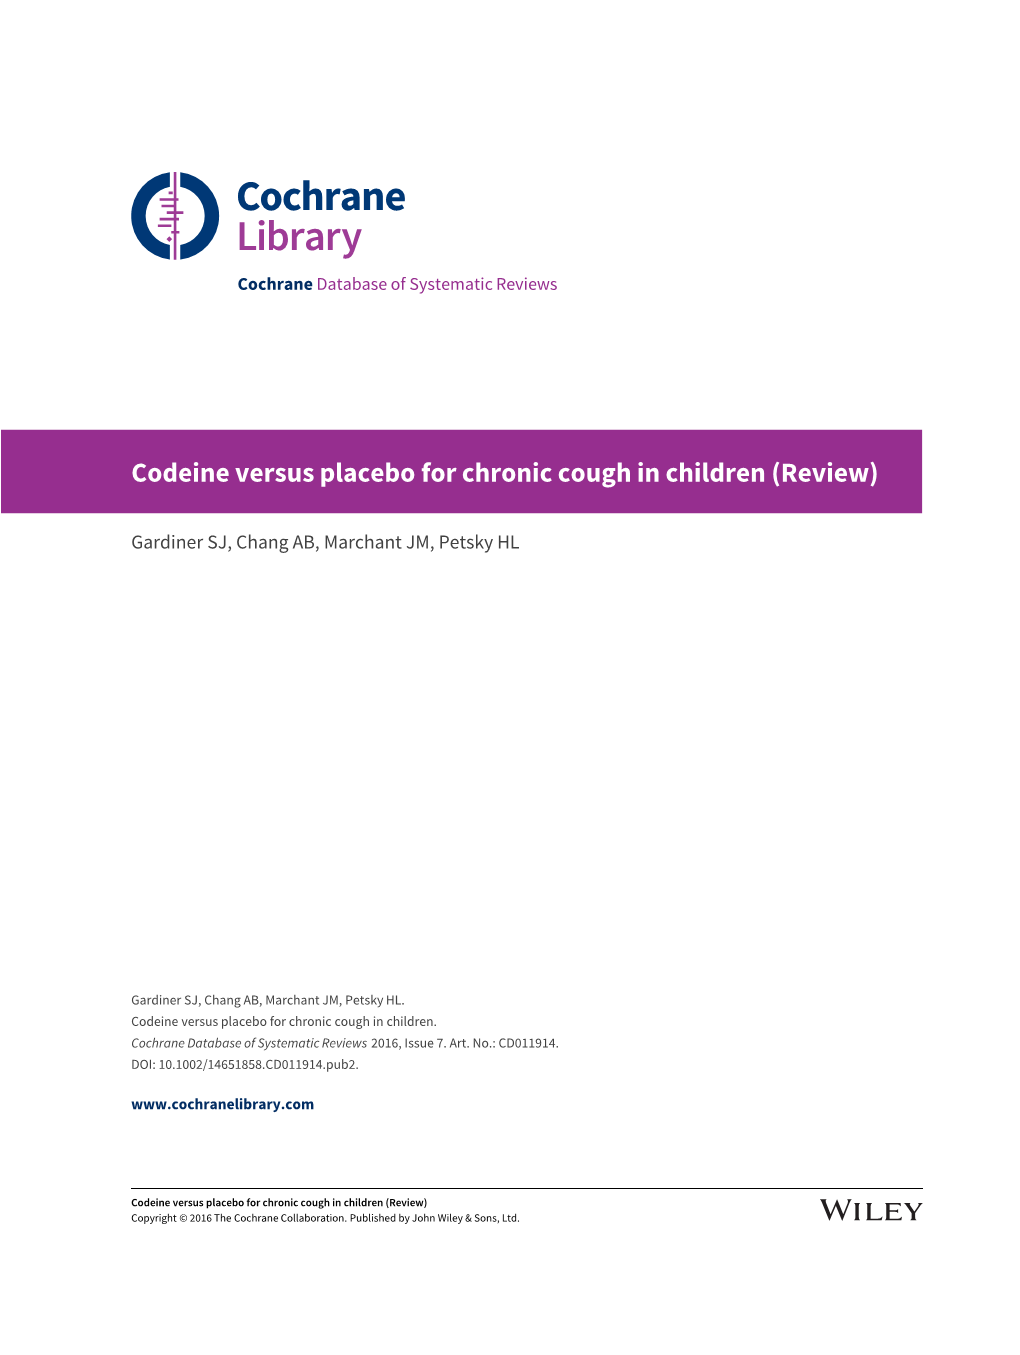 Codeine Versus Placebo for Chronic Cough in Children (Review)